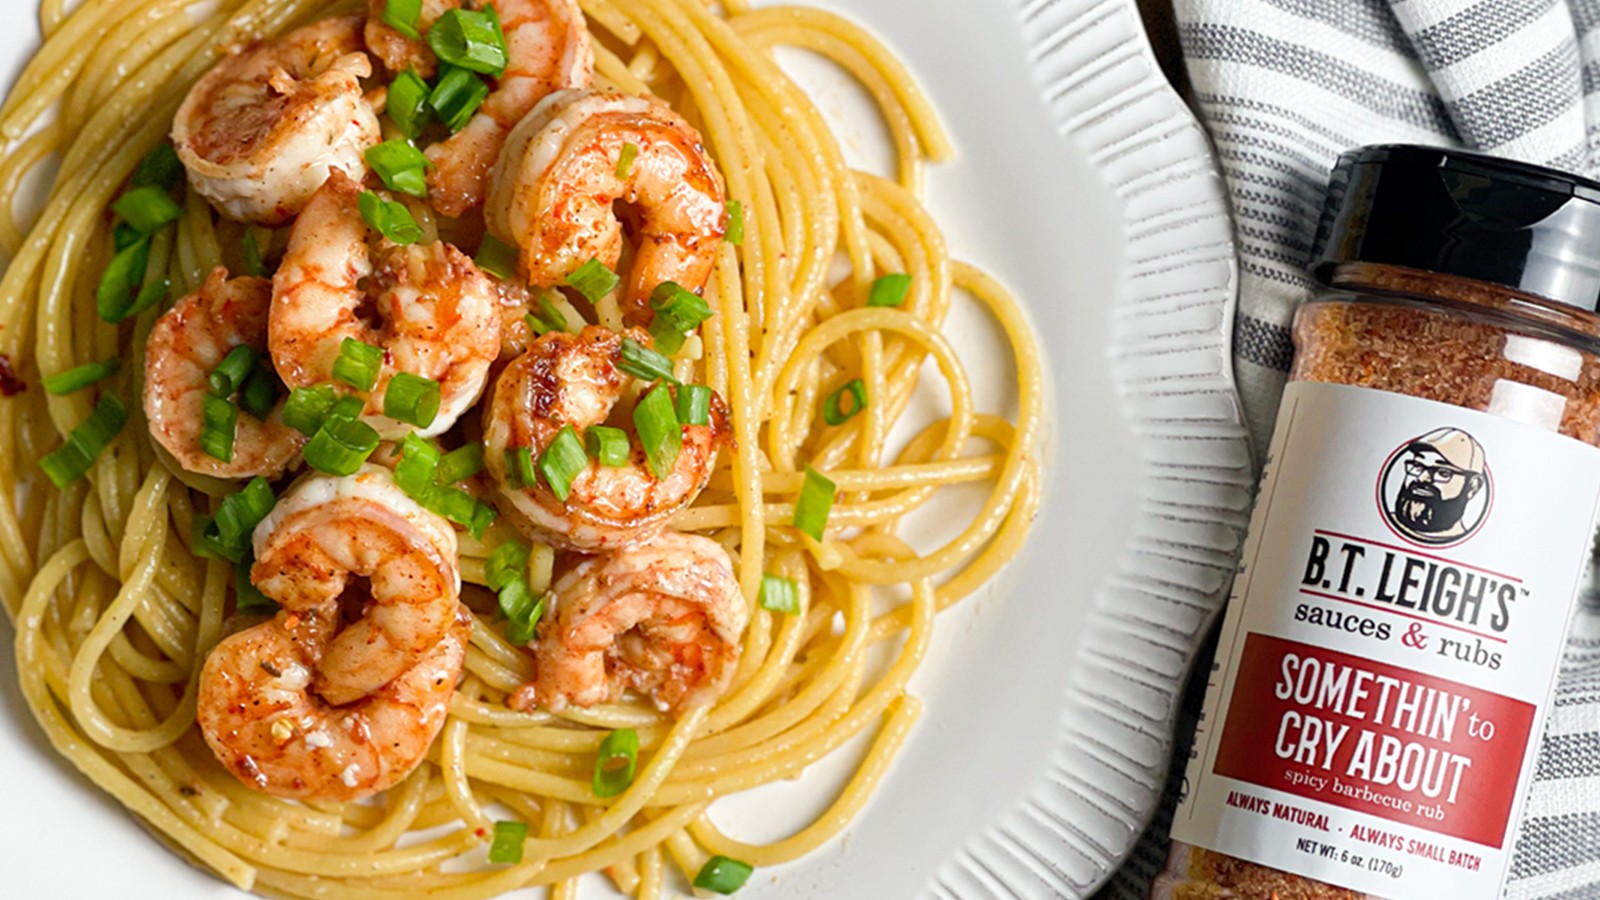 Image of Spicy Shrimp Bucatini with Lemon Butter Sauce